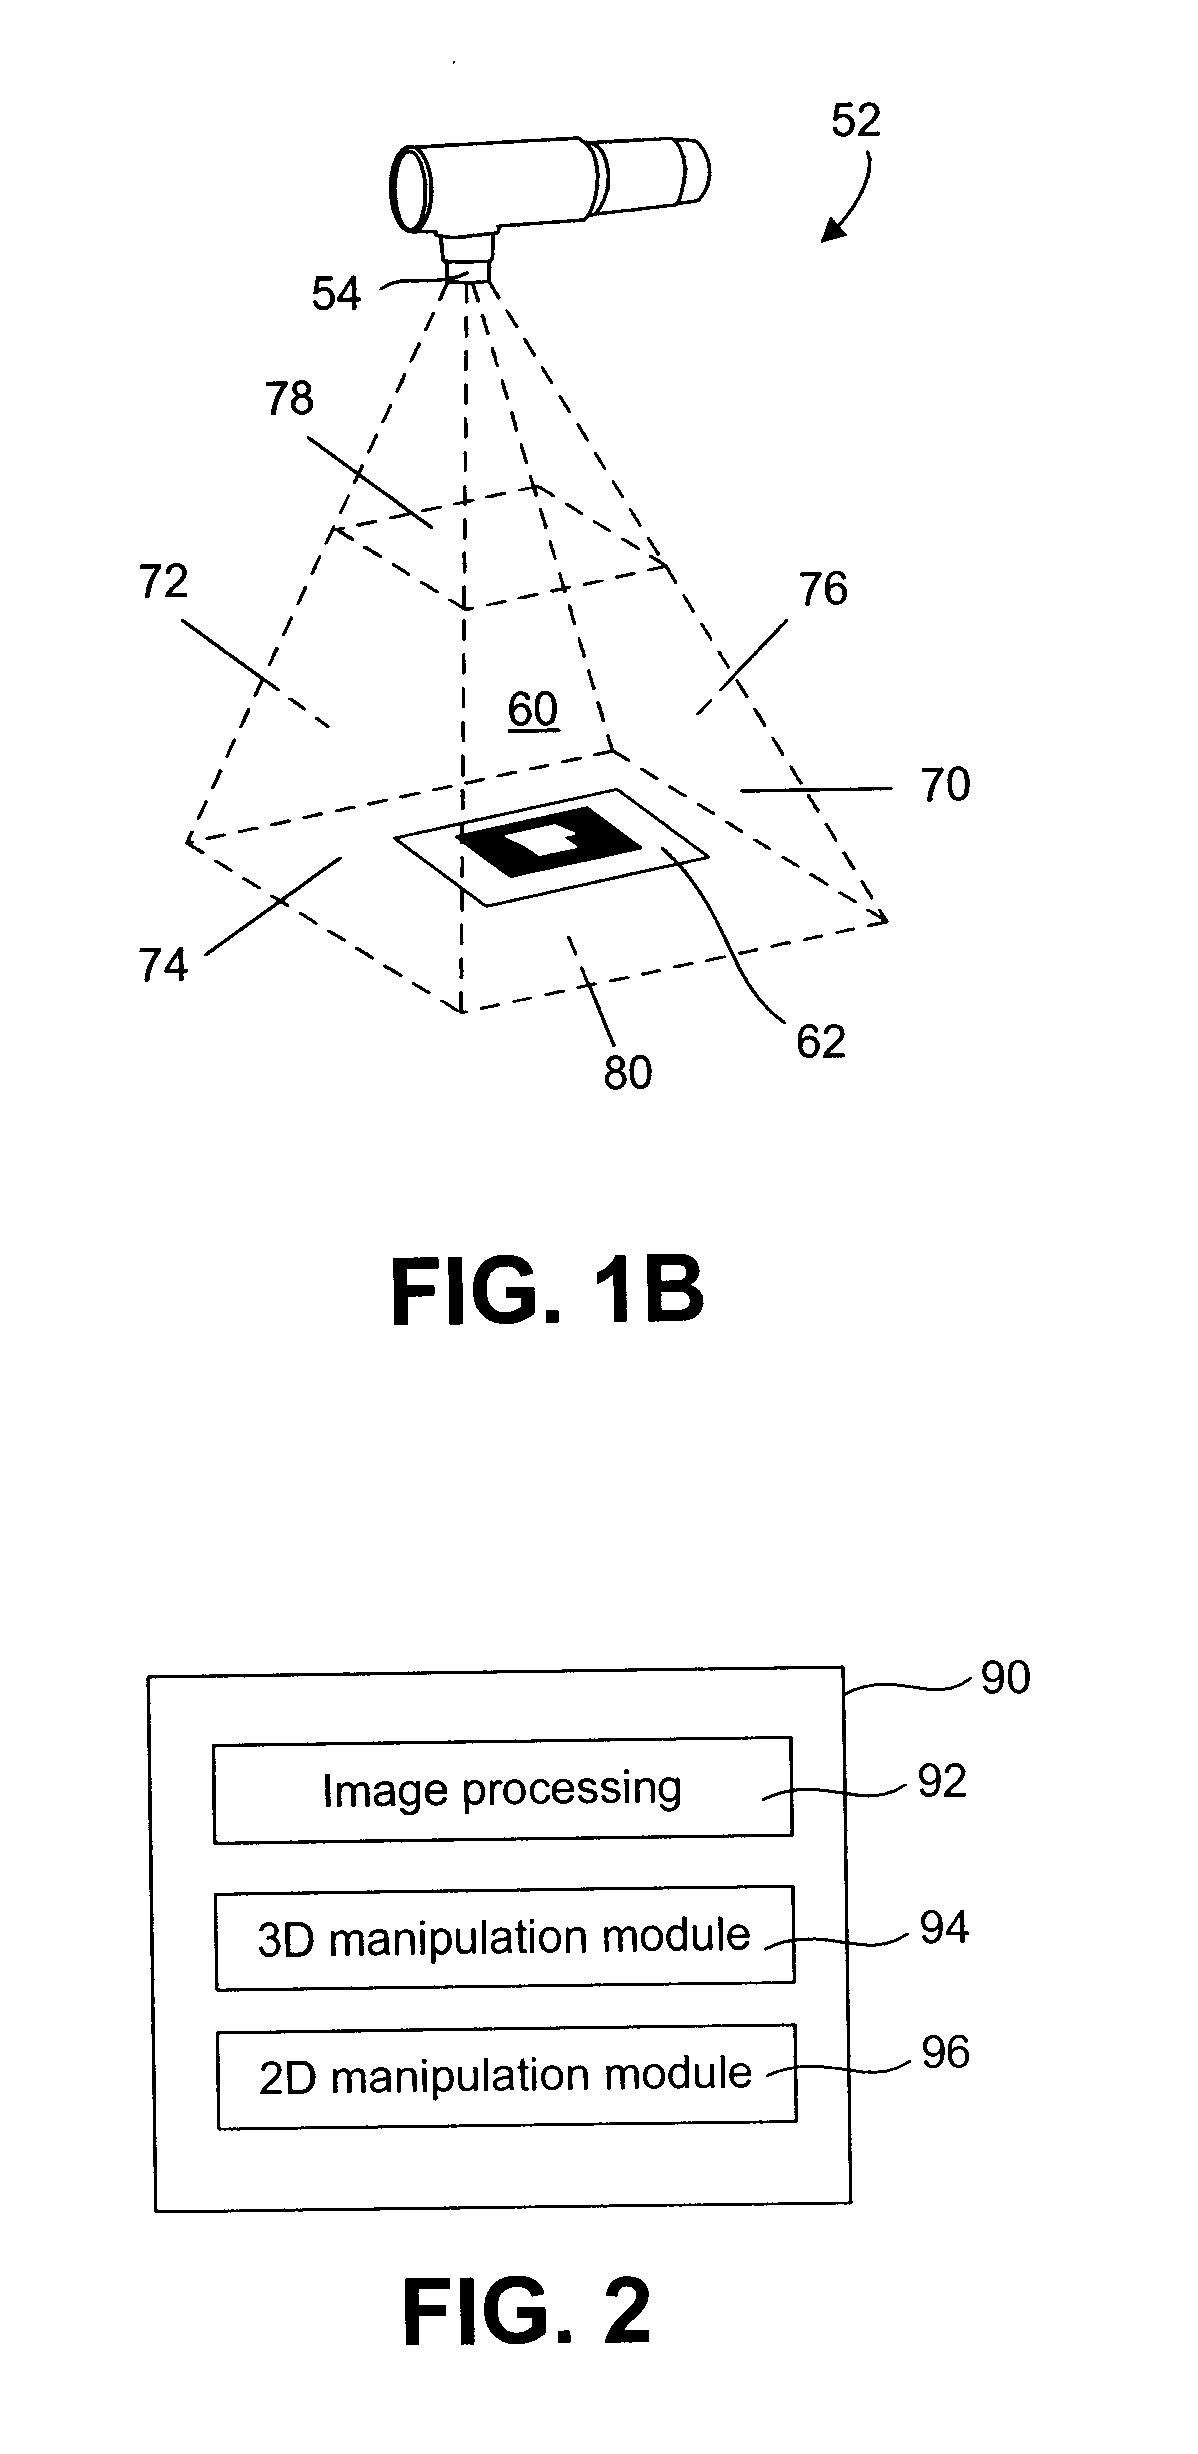 Interactive input system having a 3D input space